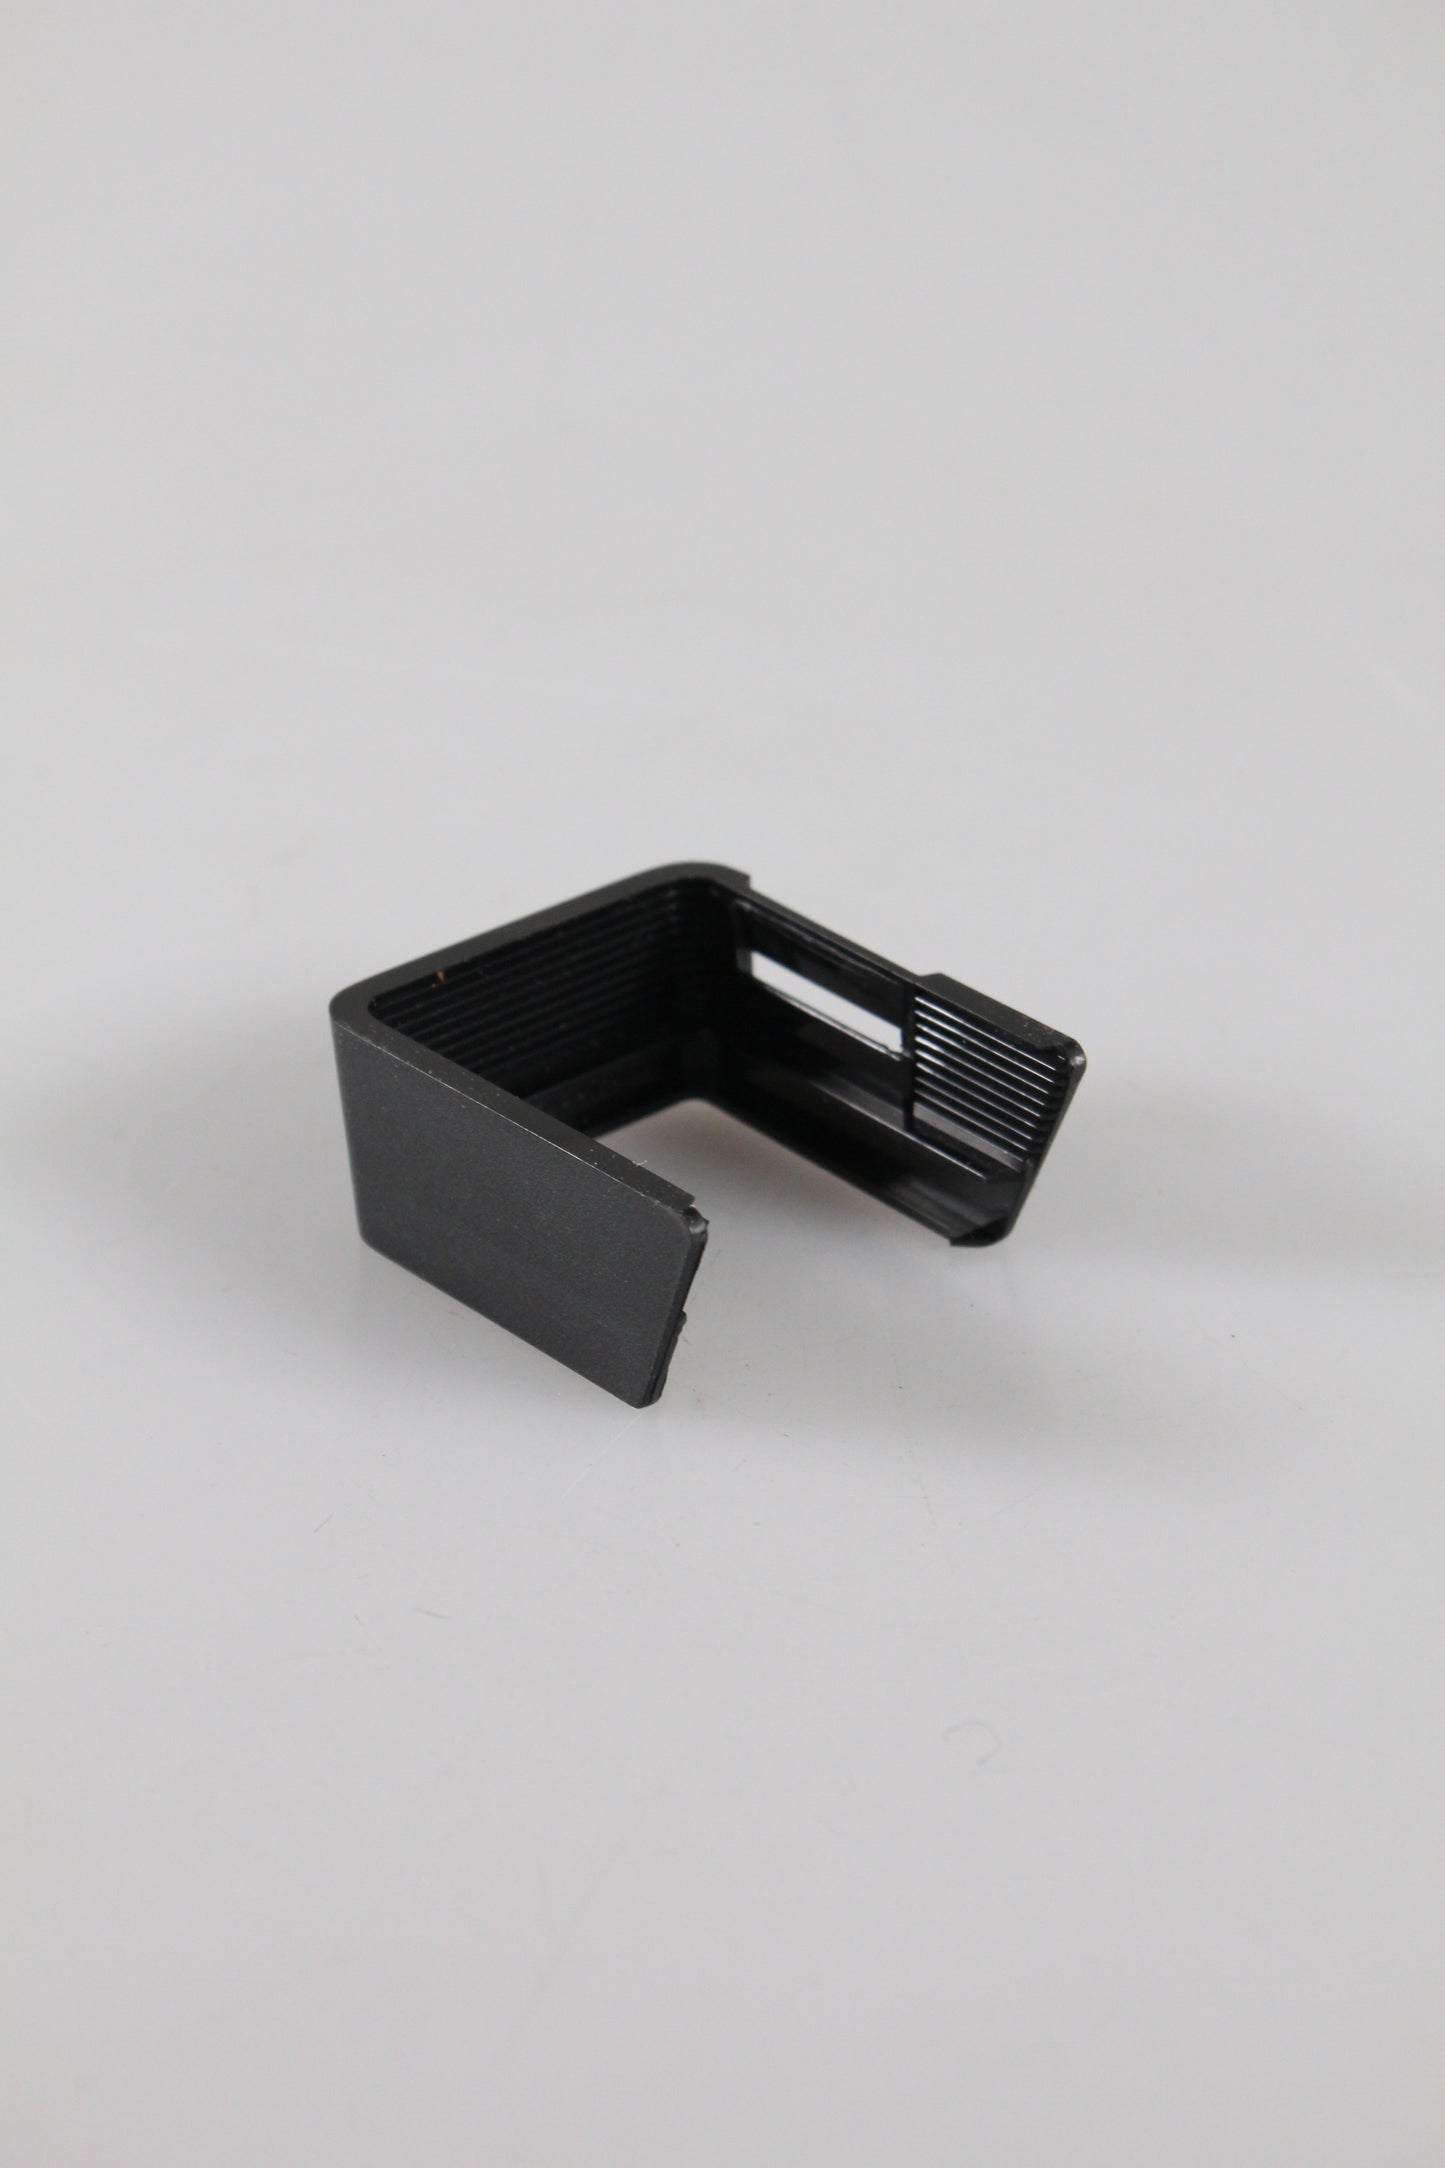 POLAROID LENS SHADE/HOOD #120 FOR SX-70 SERIES REQUIRES HOLDER #113